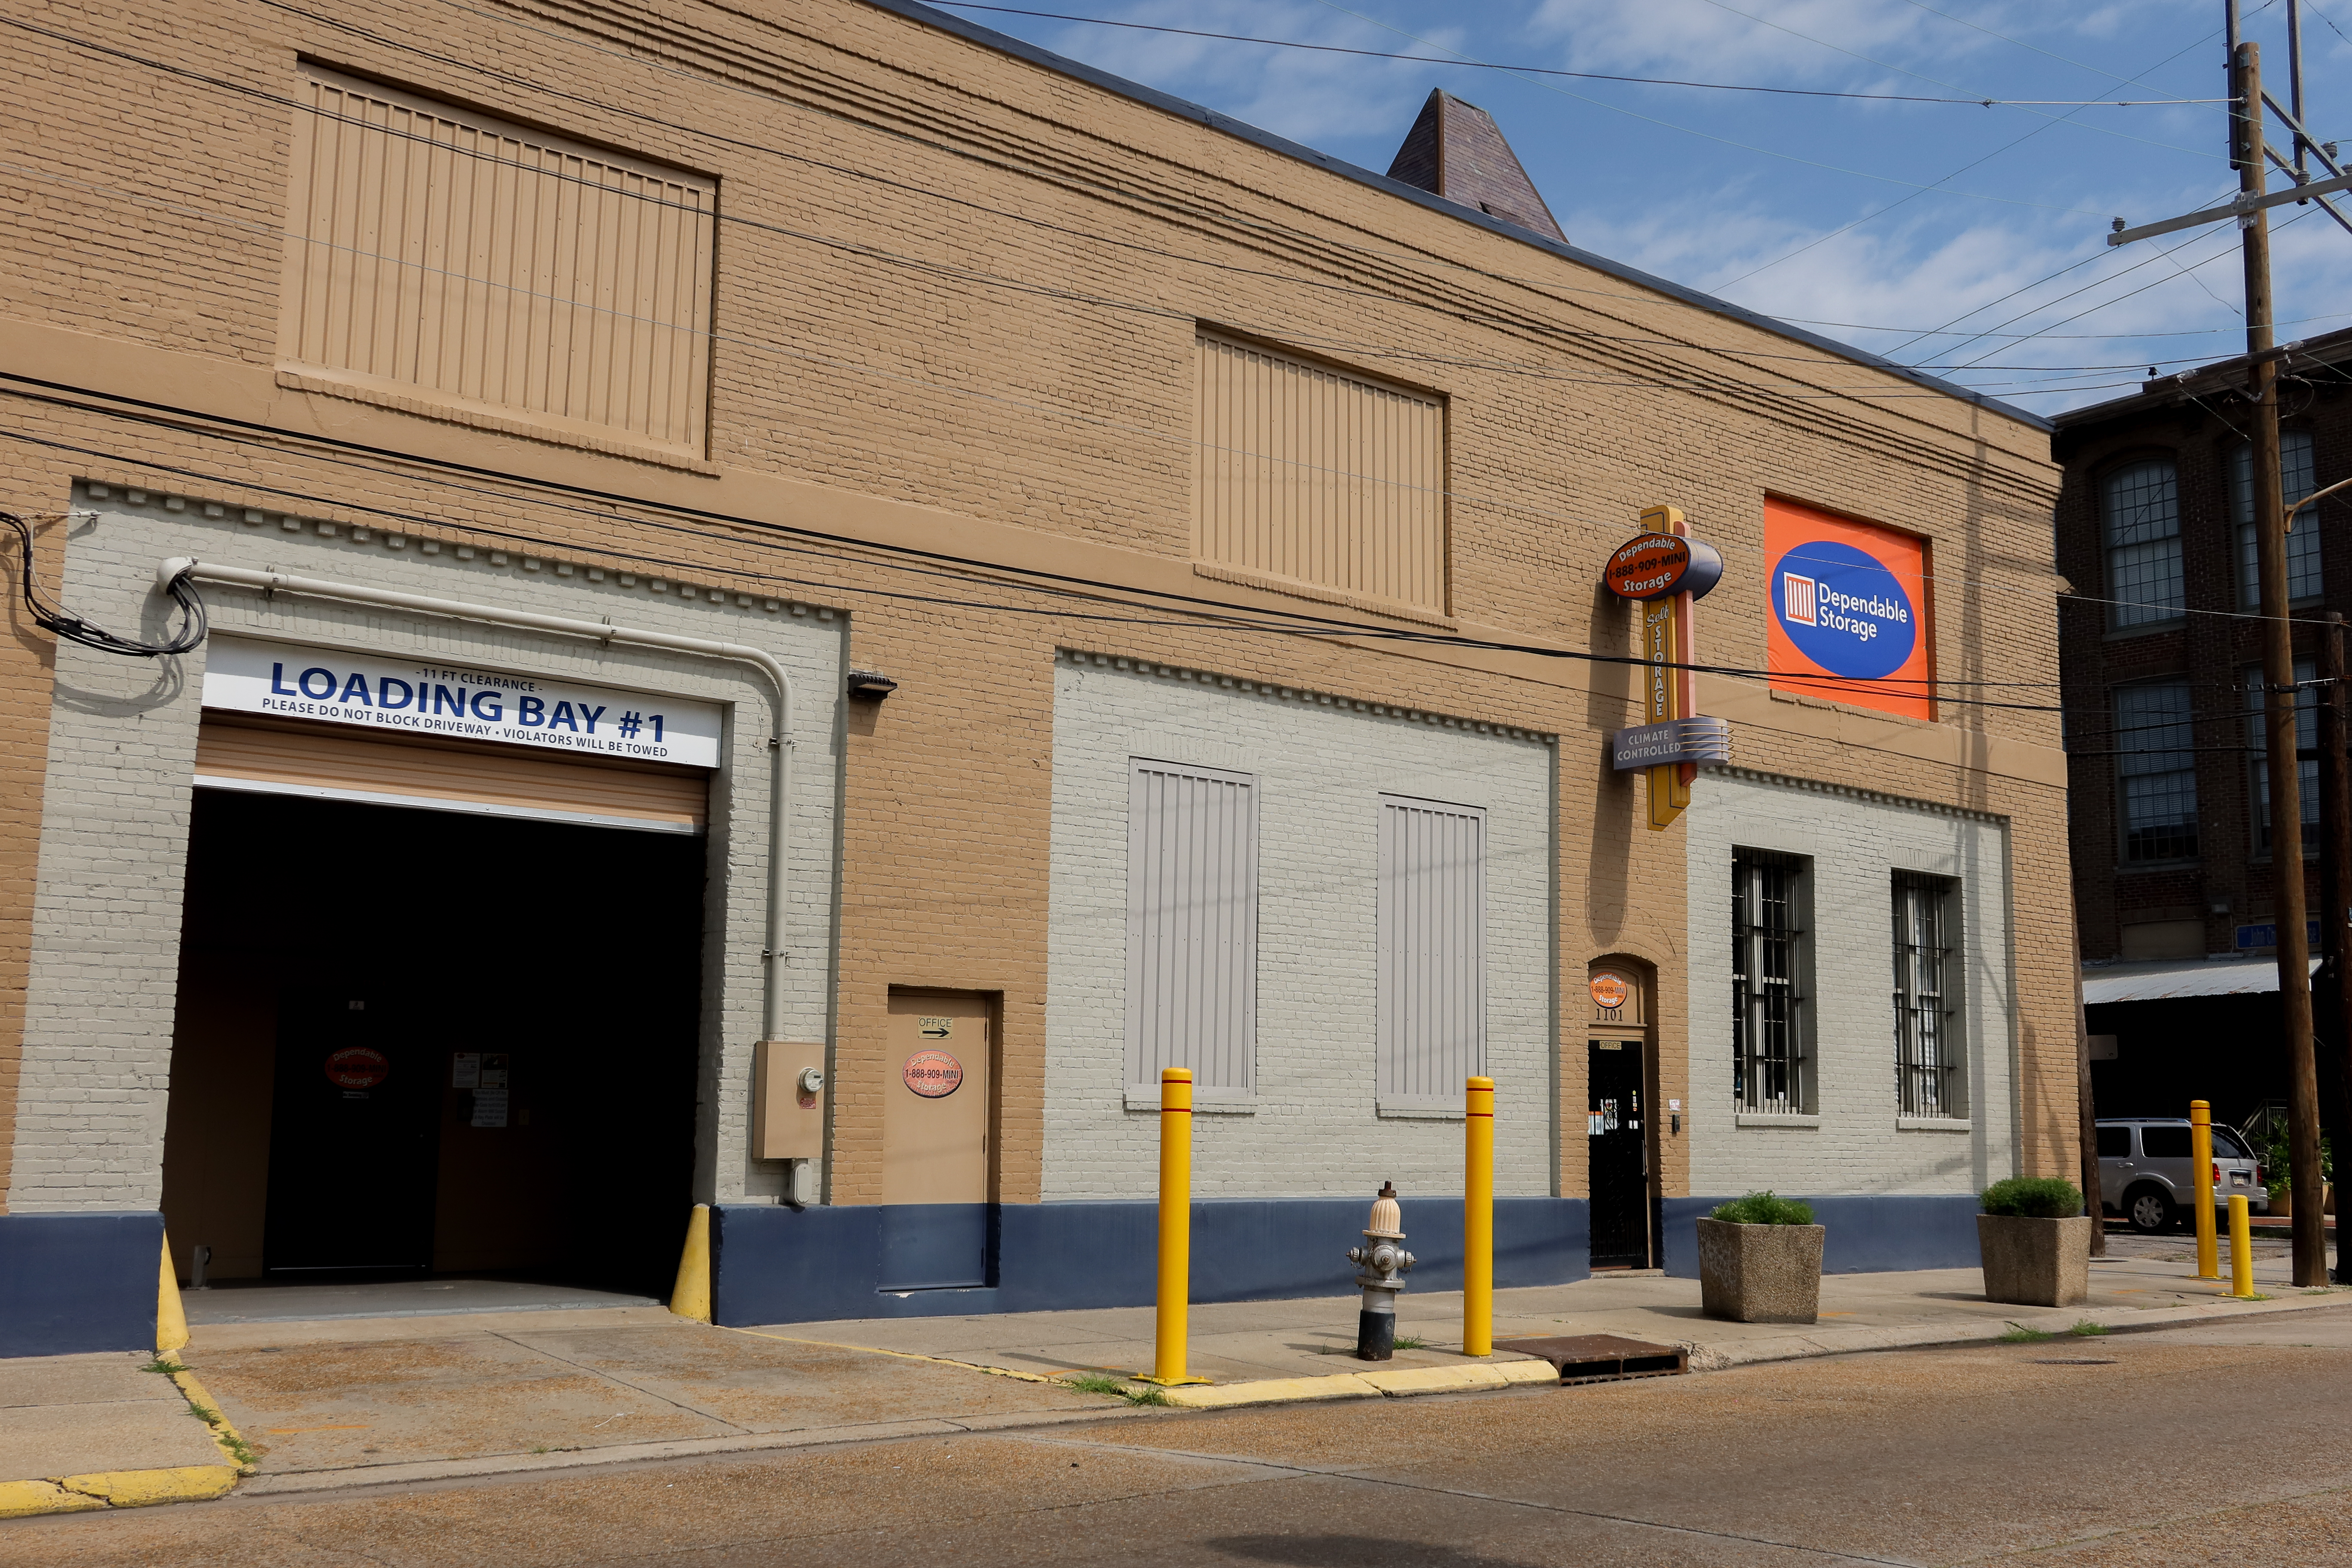 The exterior of a Dependable Storage facility featuring a large loading bay, a prominent company sign, and yellow safety bollards. The building has a beige brick facade with a blue accent at the bottom.